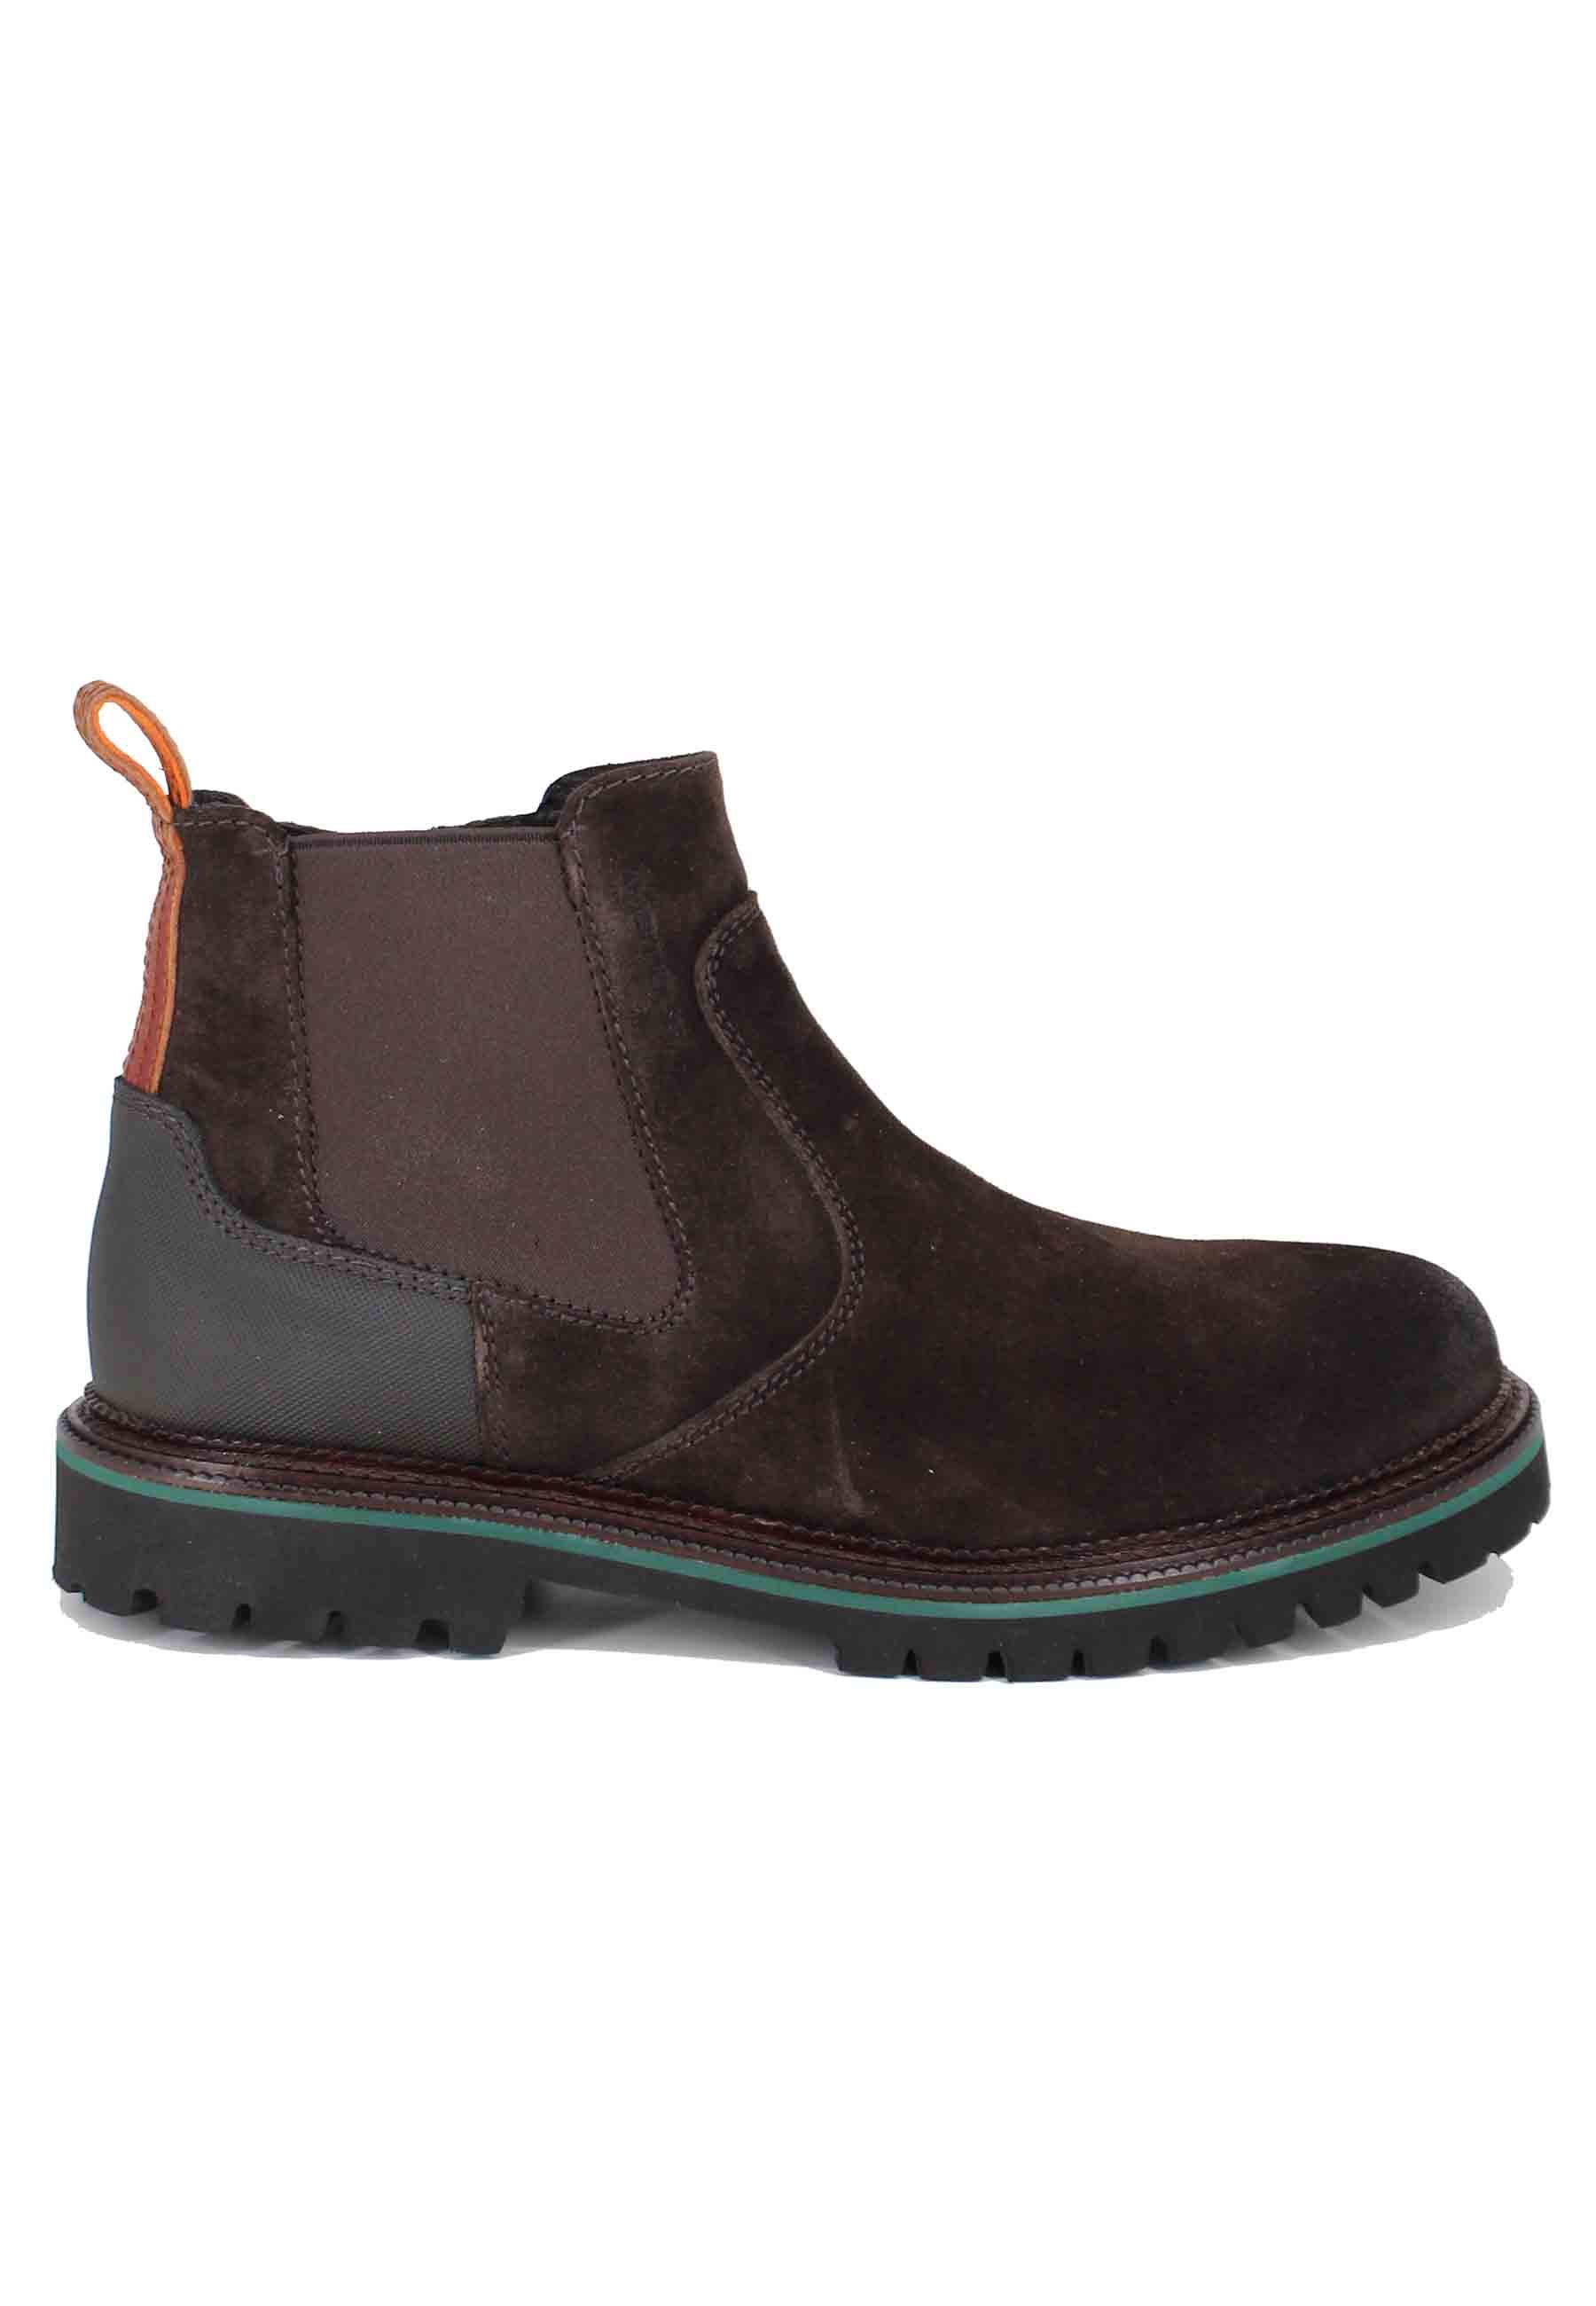 Men's ankle boots in dark brown suede with lug sole